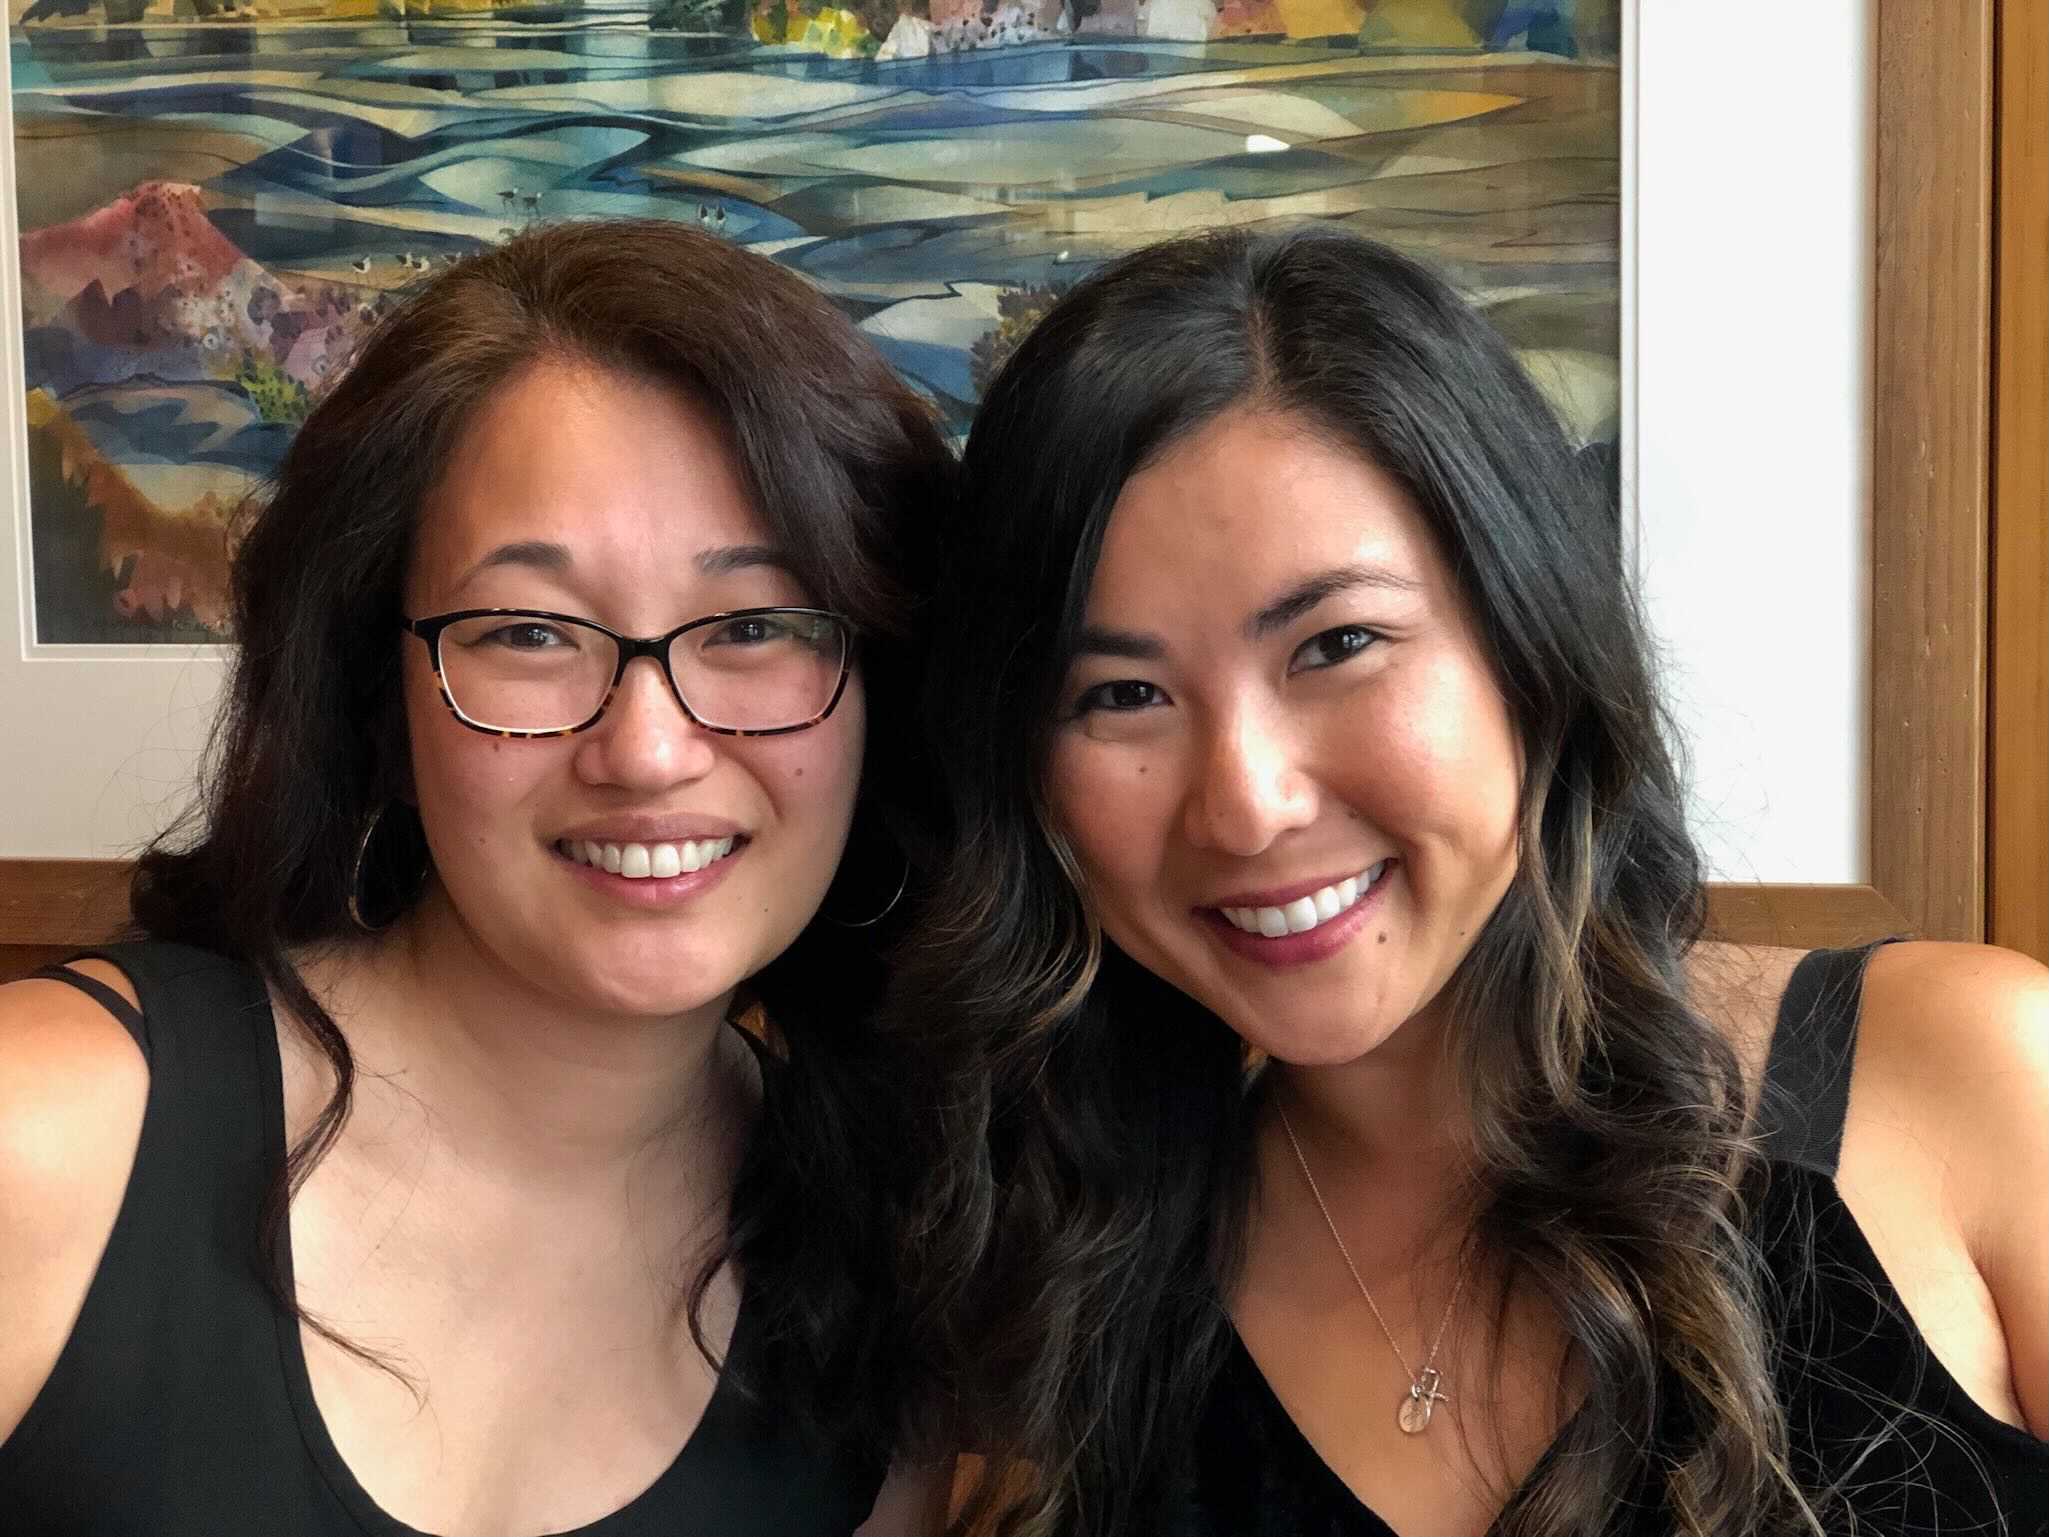 Mysti Meiers, left, and Danielle Kleist are best friends living in Washington's Tri-Cities. The women say they are having to recalibrate their relationships after instances of anti-Asian hate crimes across the U.S.